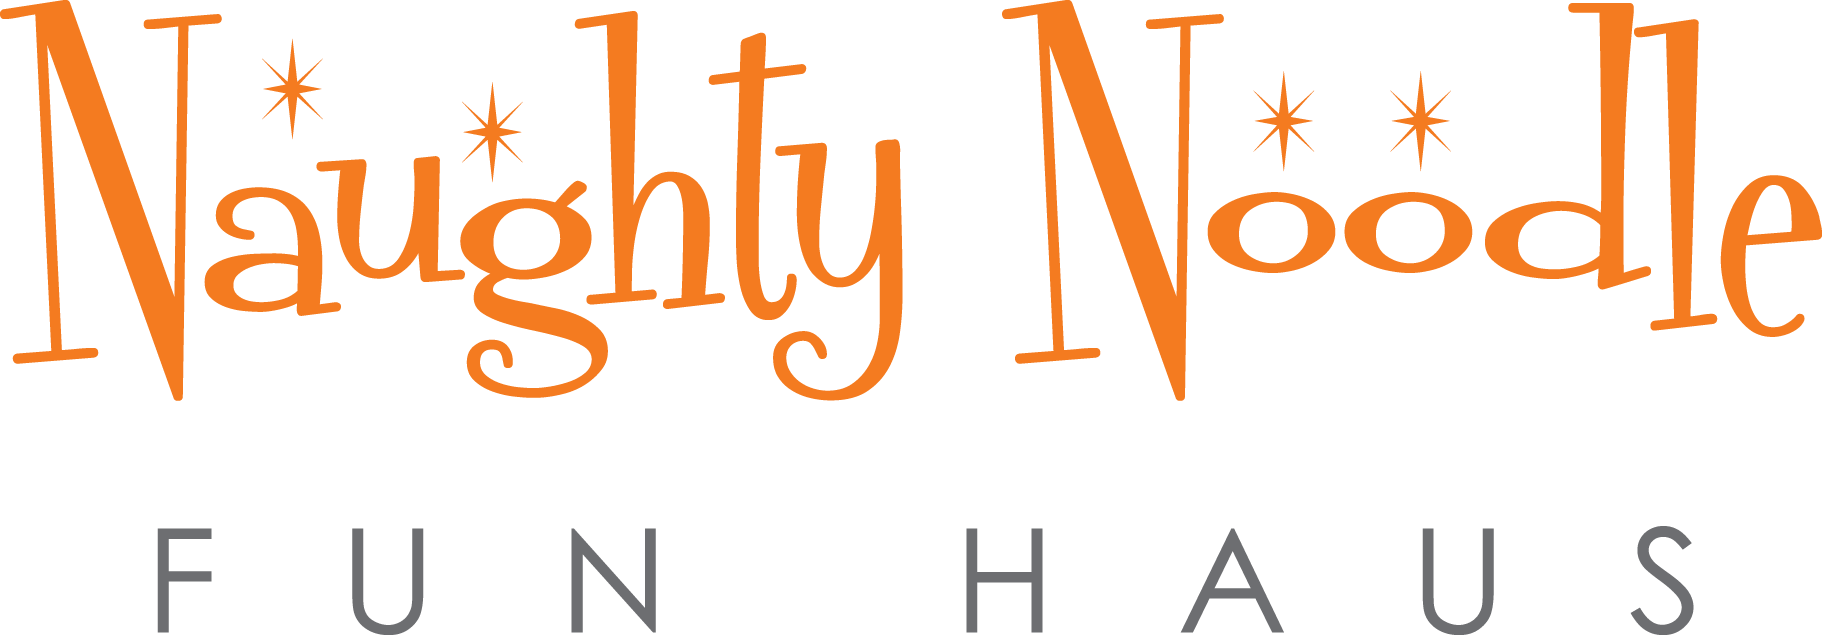 Naughty Noodle Funhaus Logo PNG image